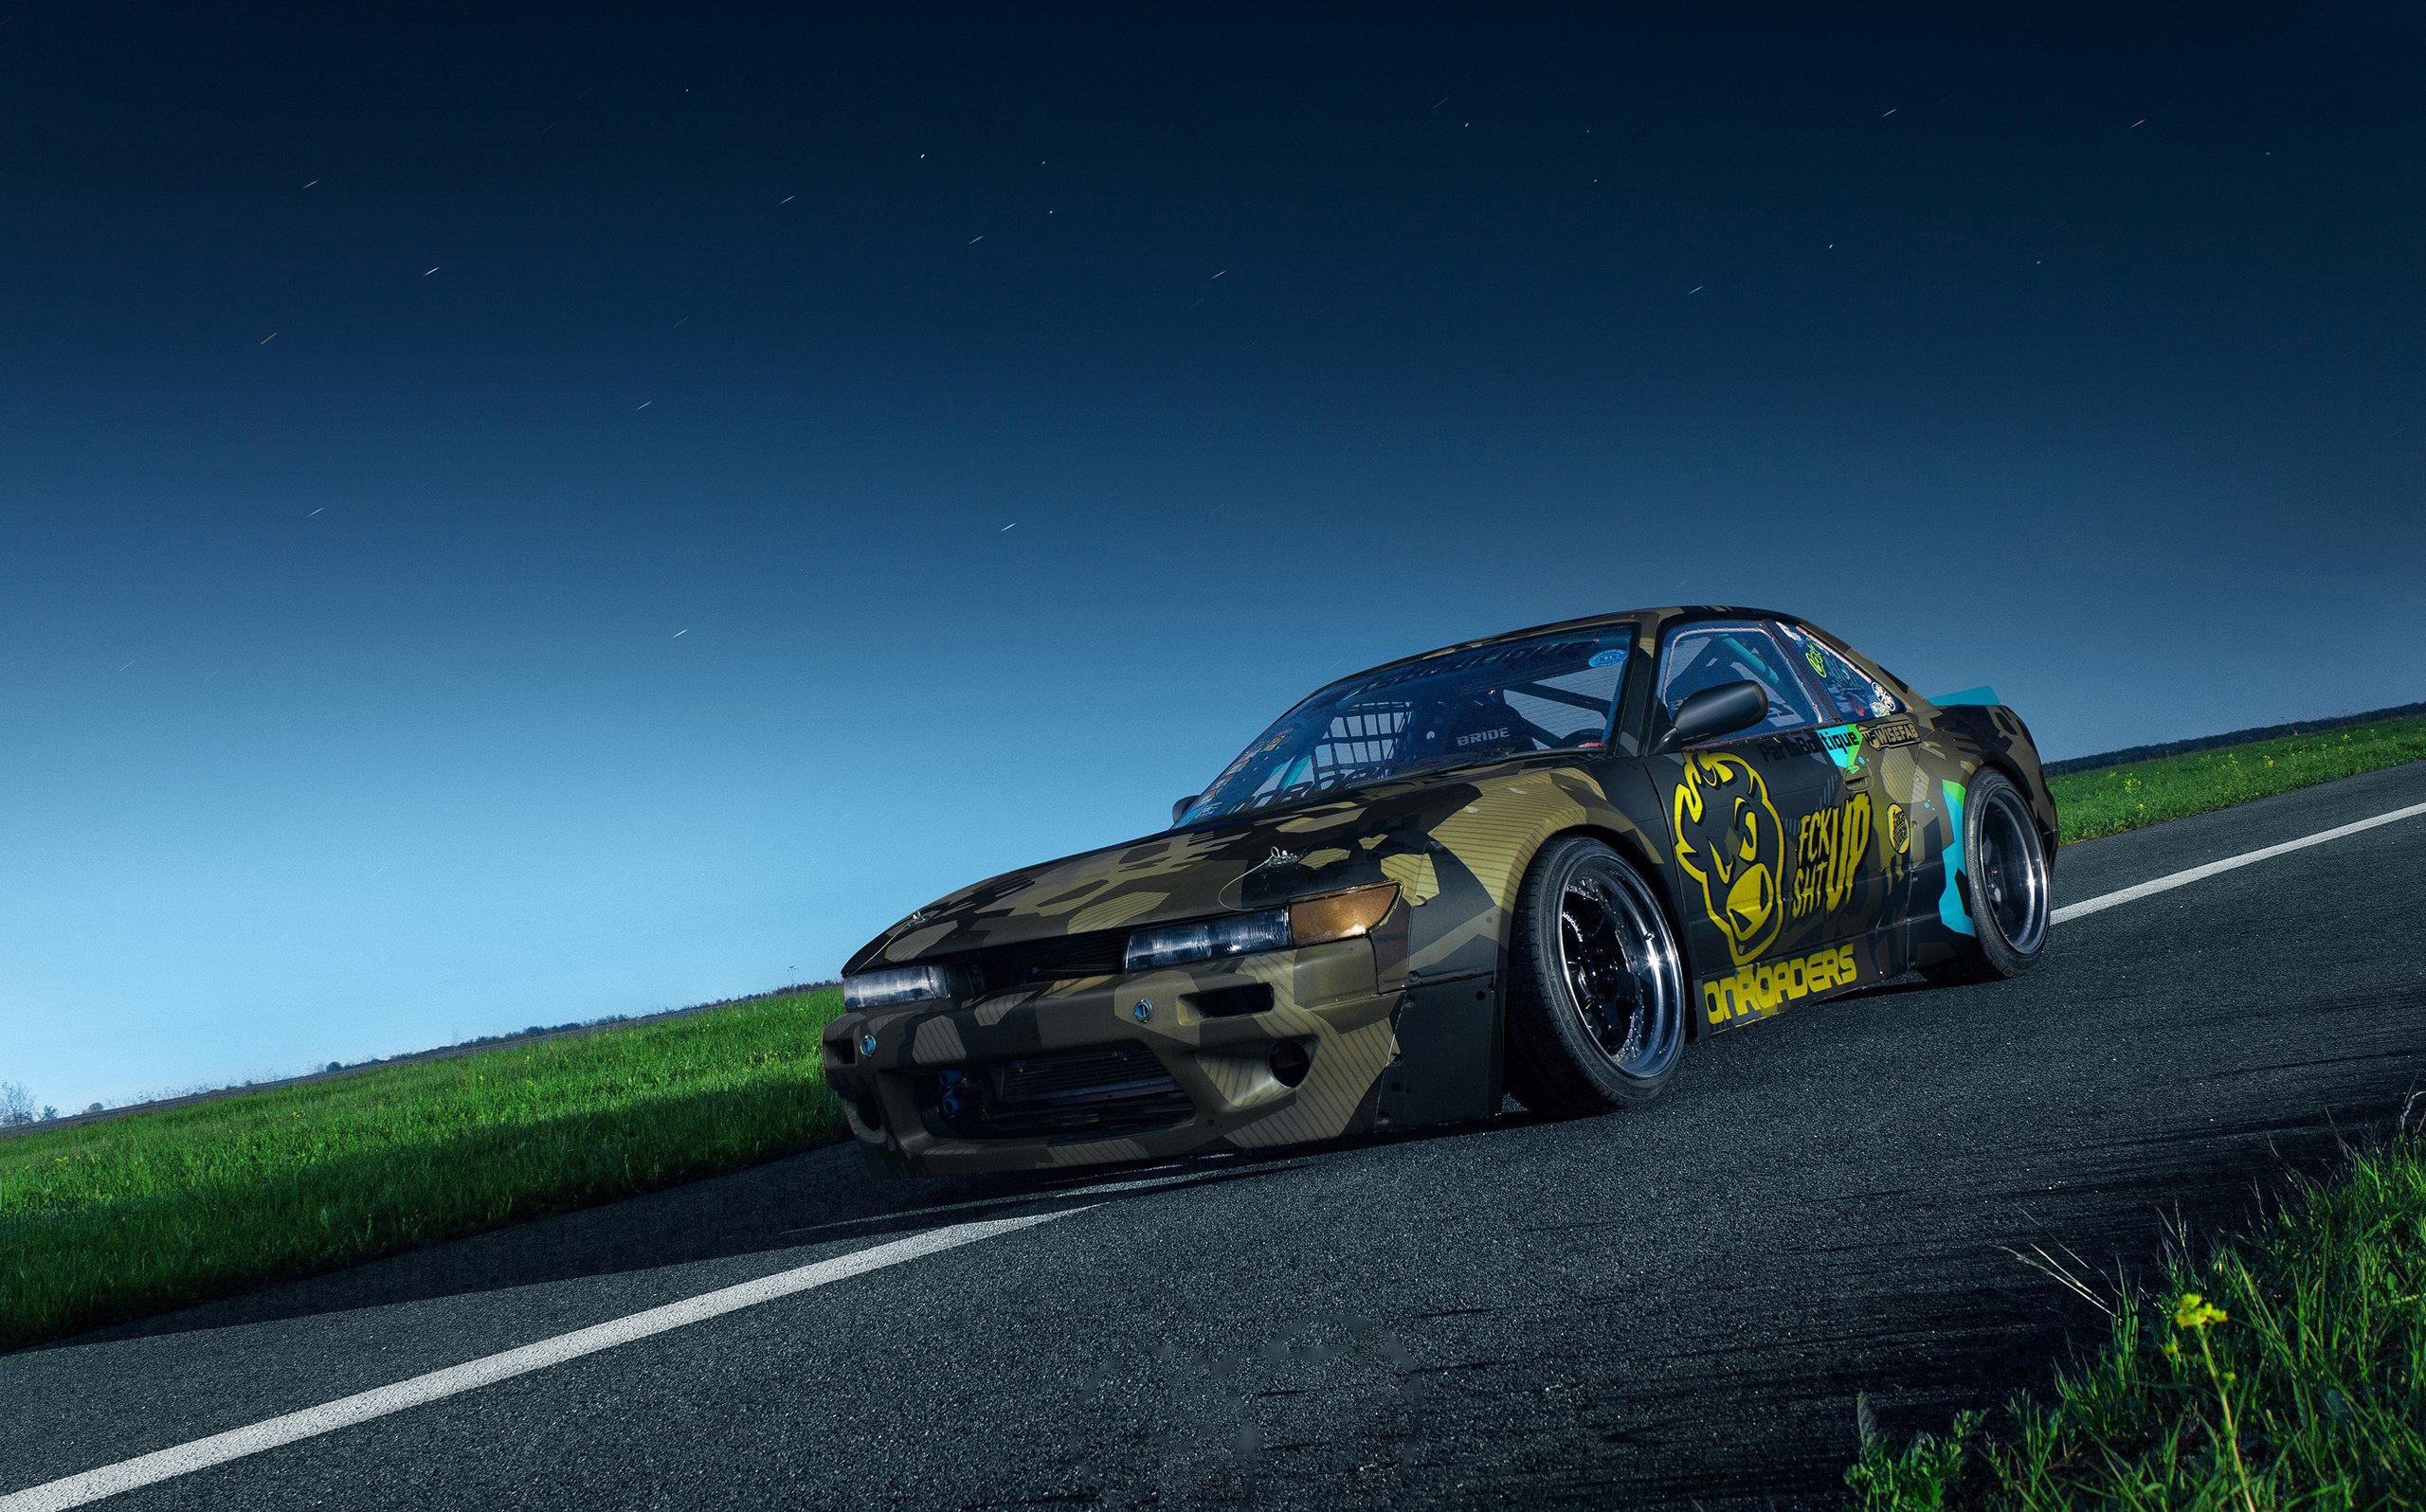 Nissan, Nissan S13, Nissan silvia, Nissan Silvia S13, S13, Silvia S13, JDM, JDM Lifestyle, Japanese cars, Norway, Stance, Photography, Airport, Planes, Evening, Stars, Work Wheels, Japan Wallpaper